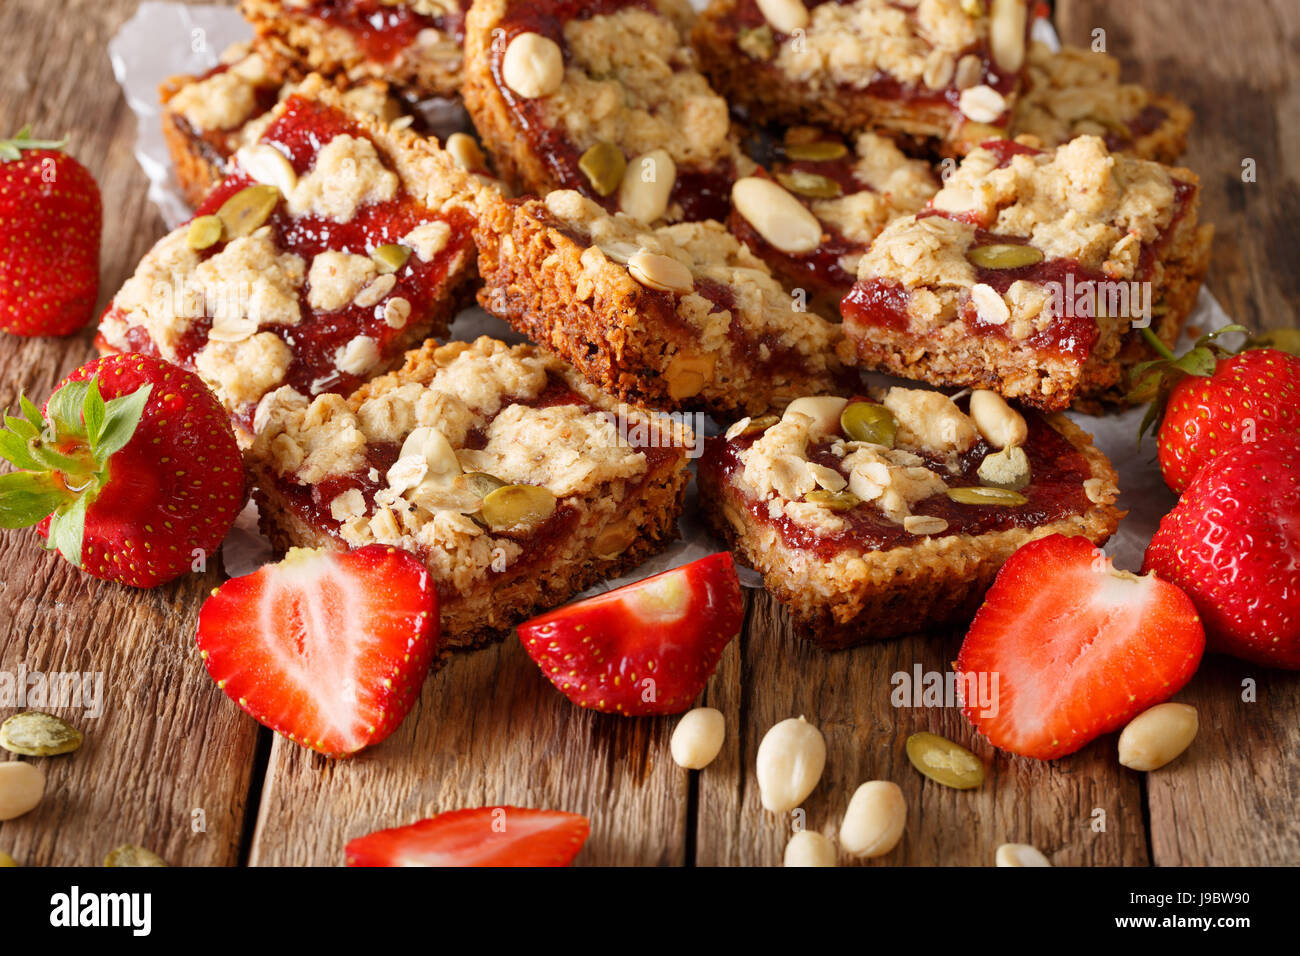 Granola bars with strawberry jam, seeds and nuts close-up on the table. Horizontal Stock Photo